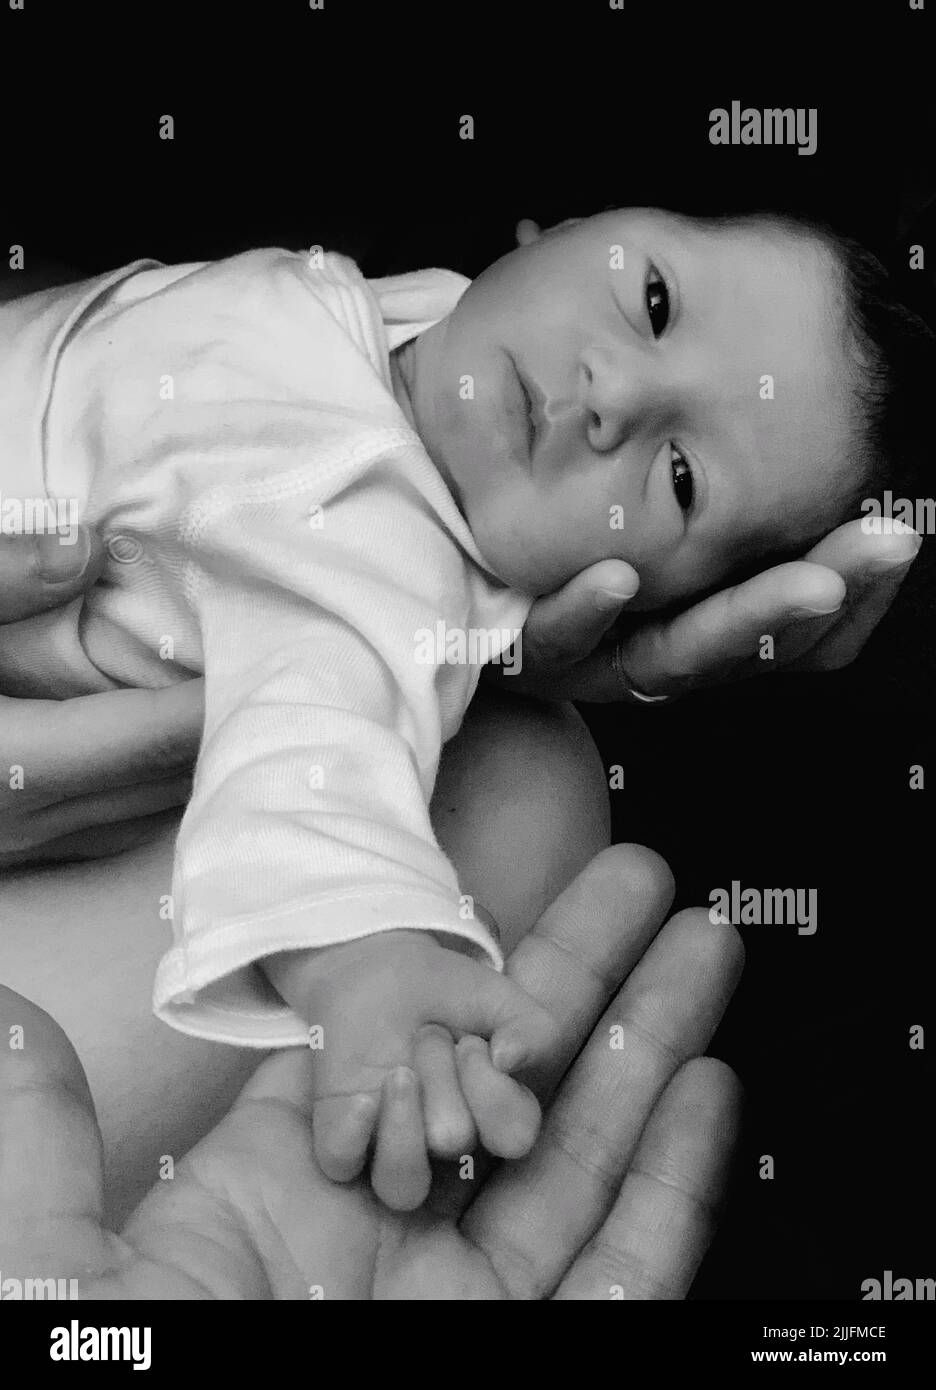 A vertical black and white shot of hands holding a newborn baby in a dark background Stock Photo